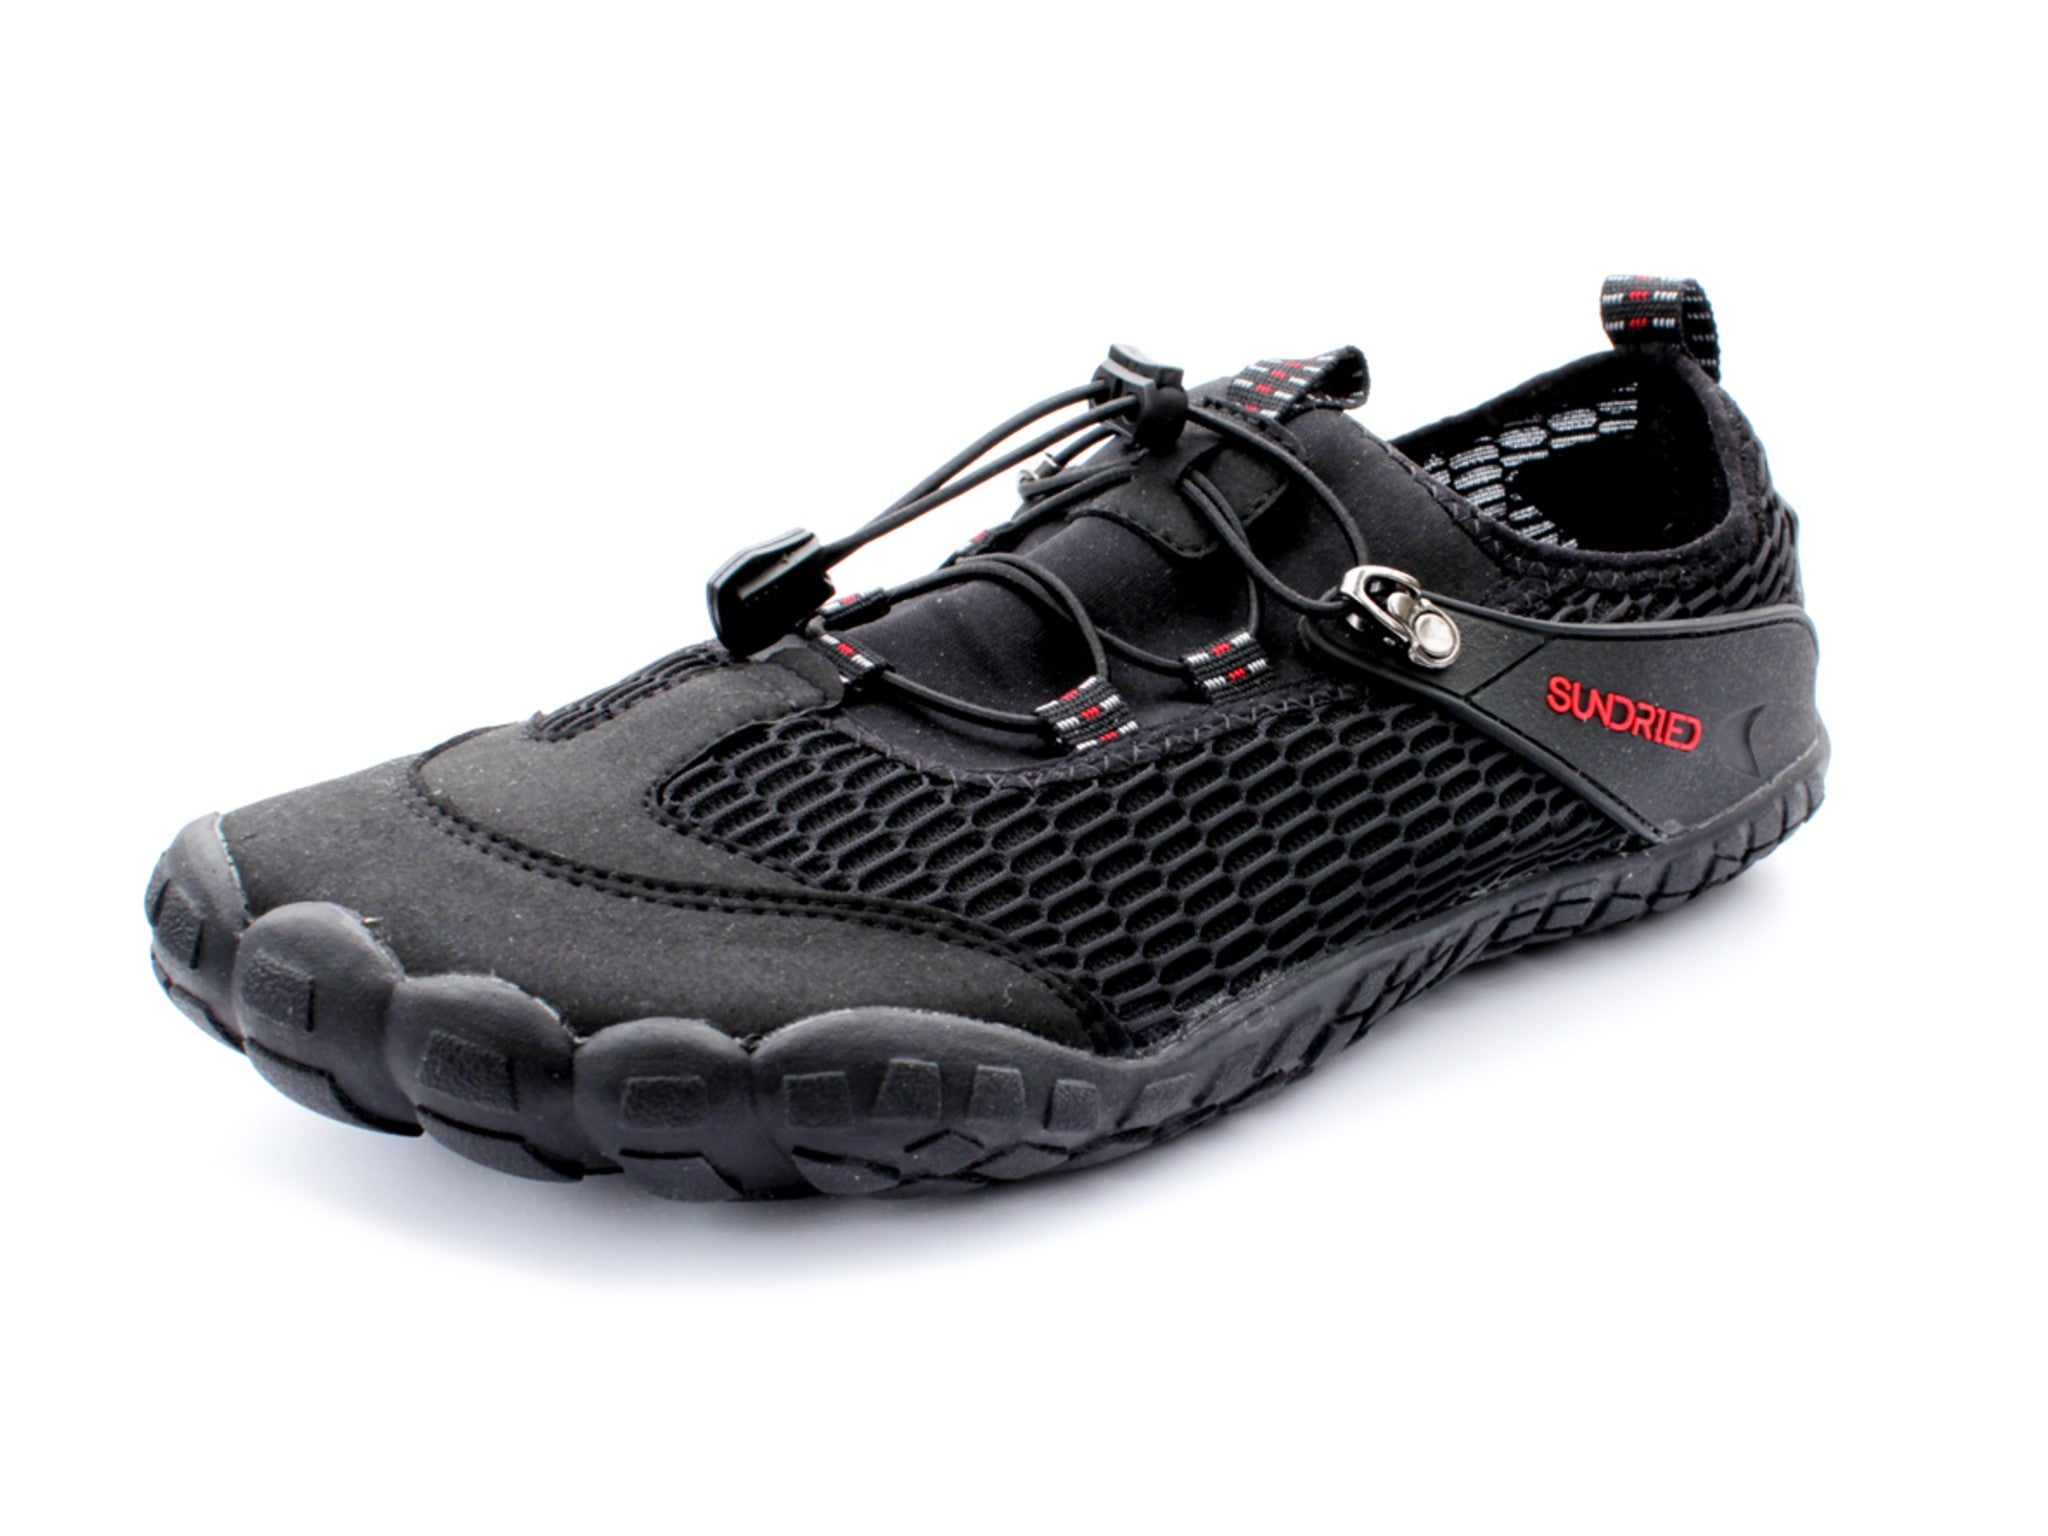 Sundried women's barefoot shoes 2.0 indybest.jpg